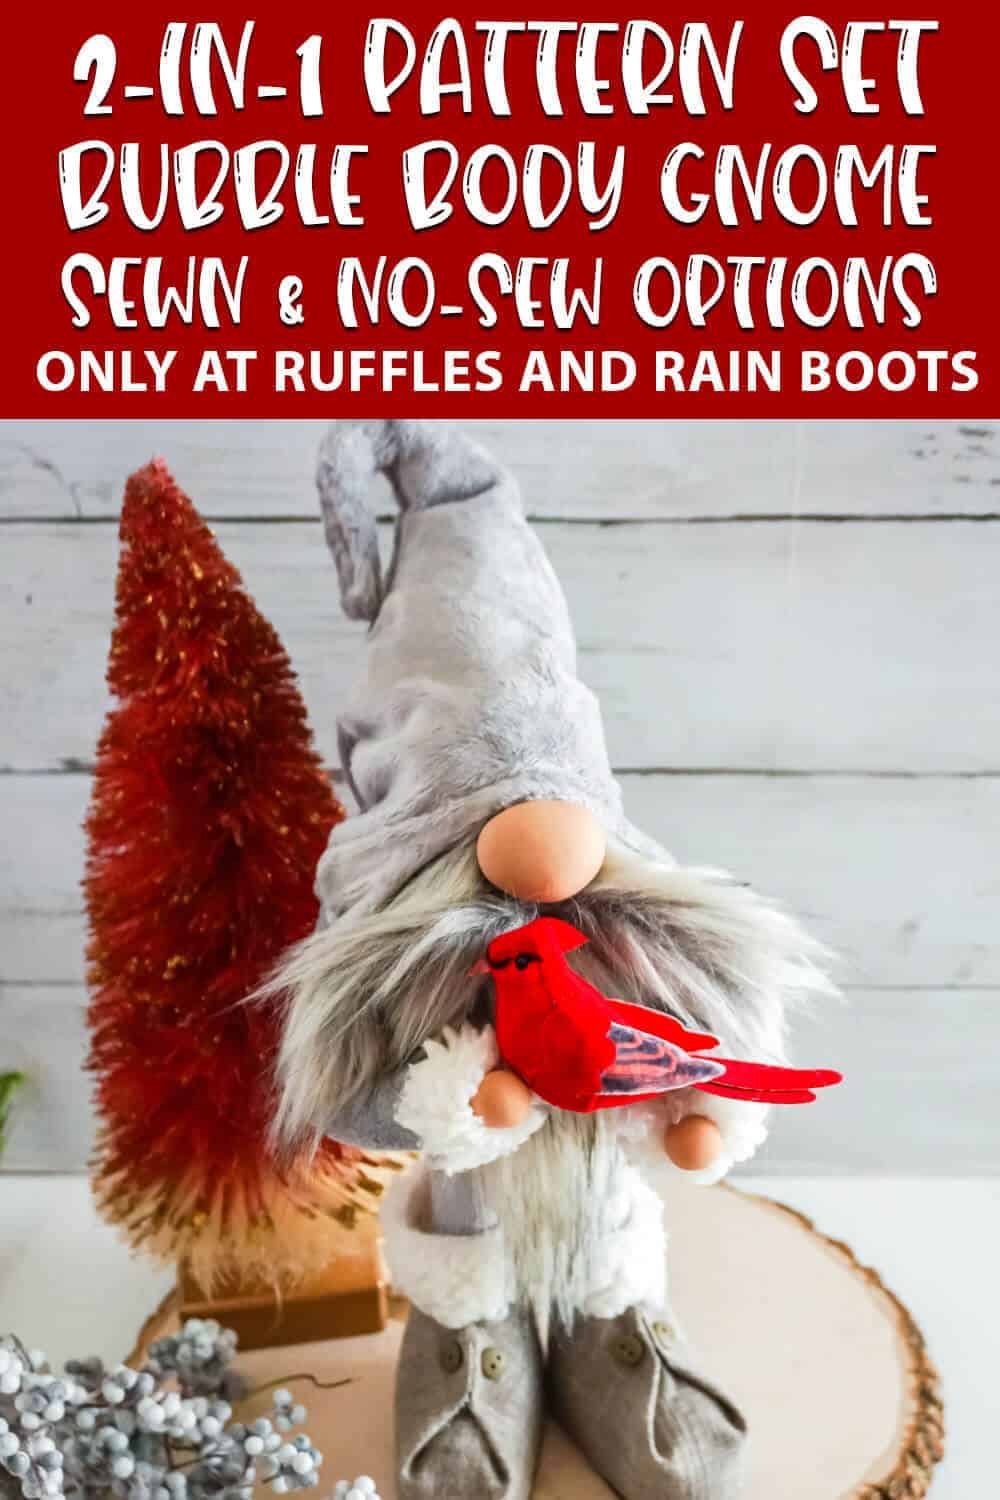 sewing pattern scandinavian gnome with sewn and no-sew options with text which reads 2-in-1 pattern set bubble body gnome sewn & no-sew options